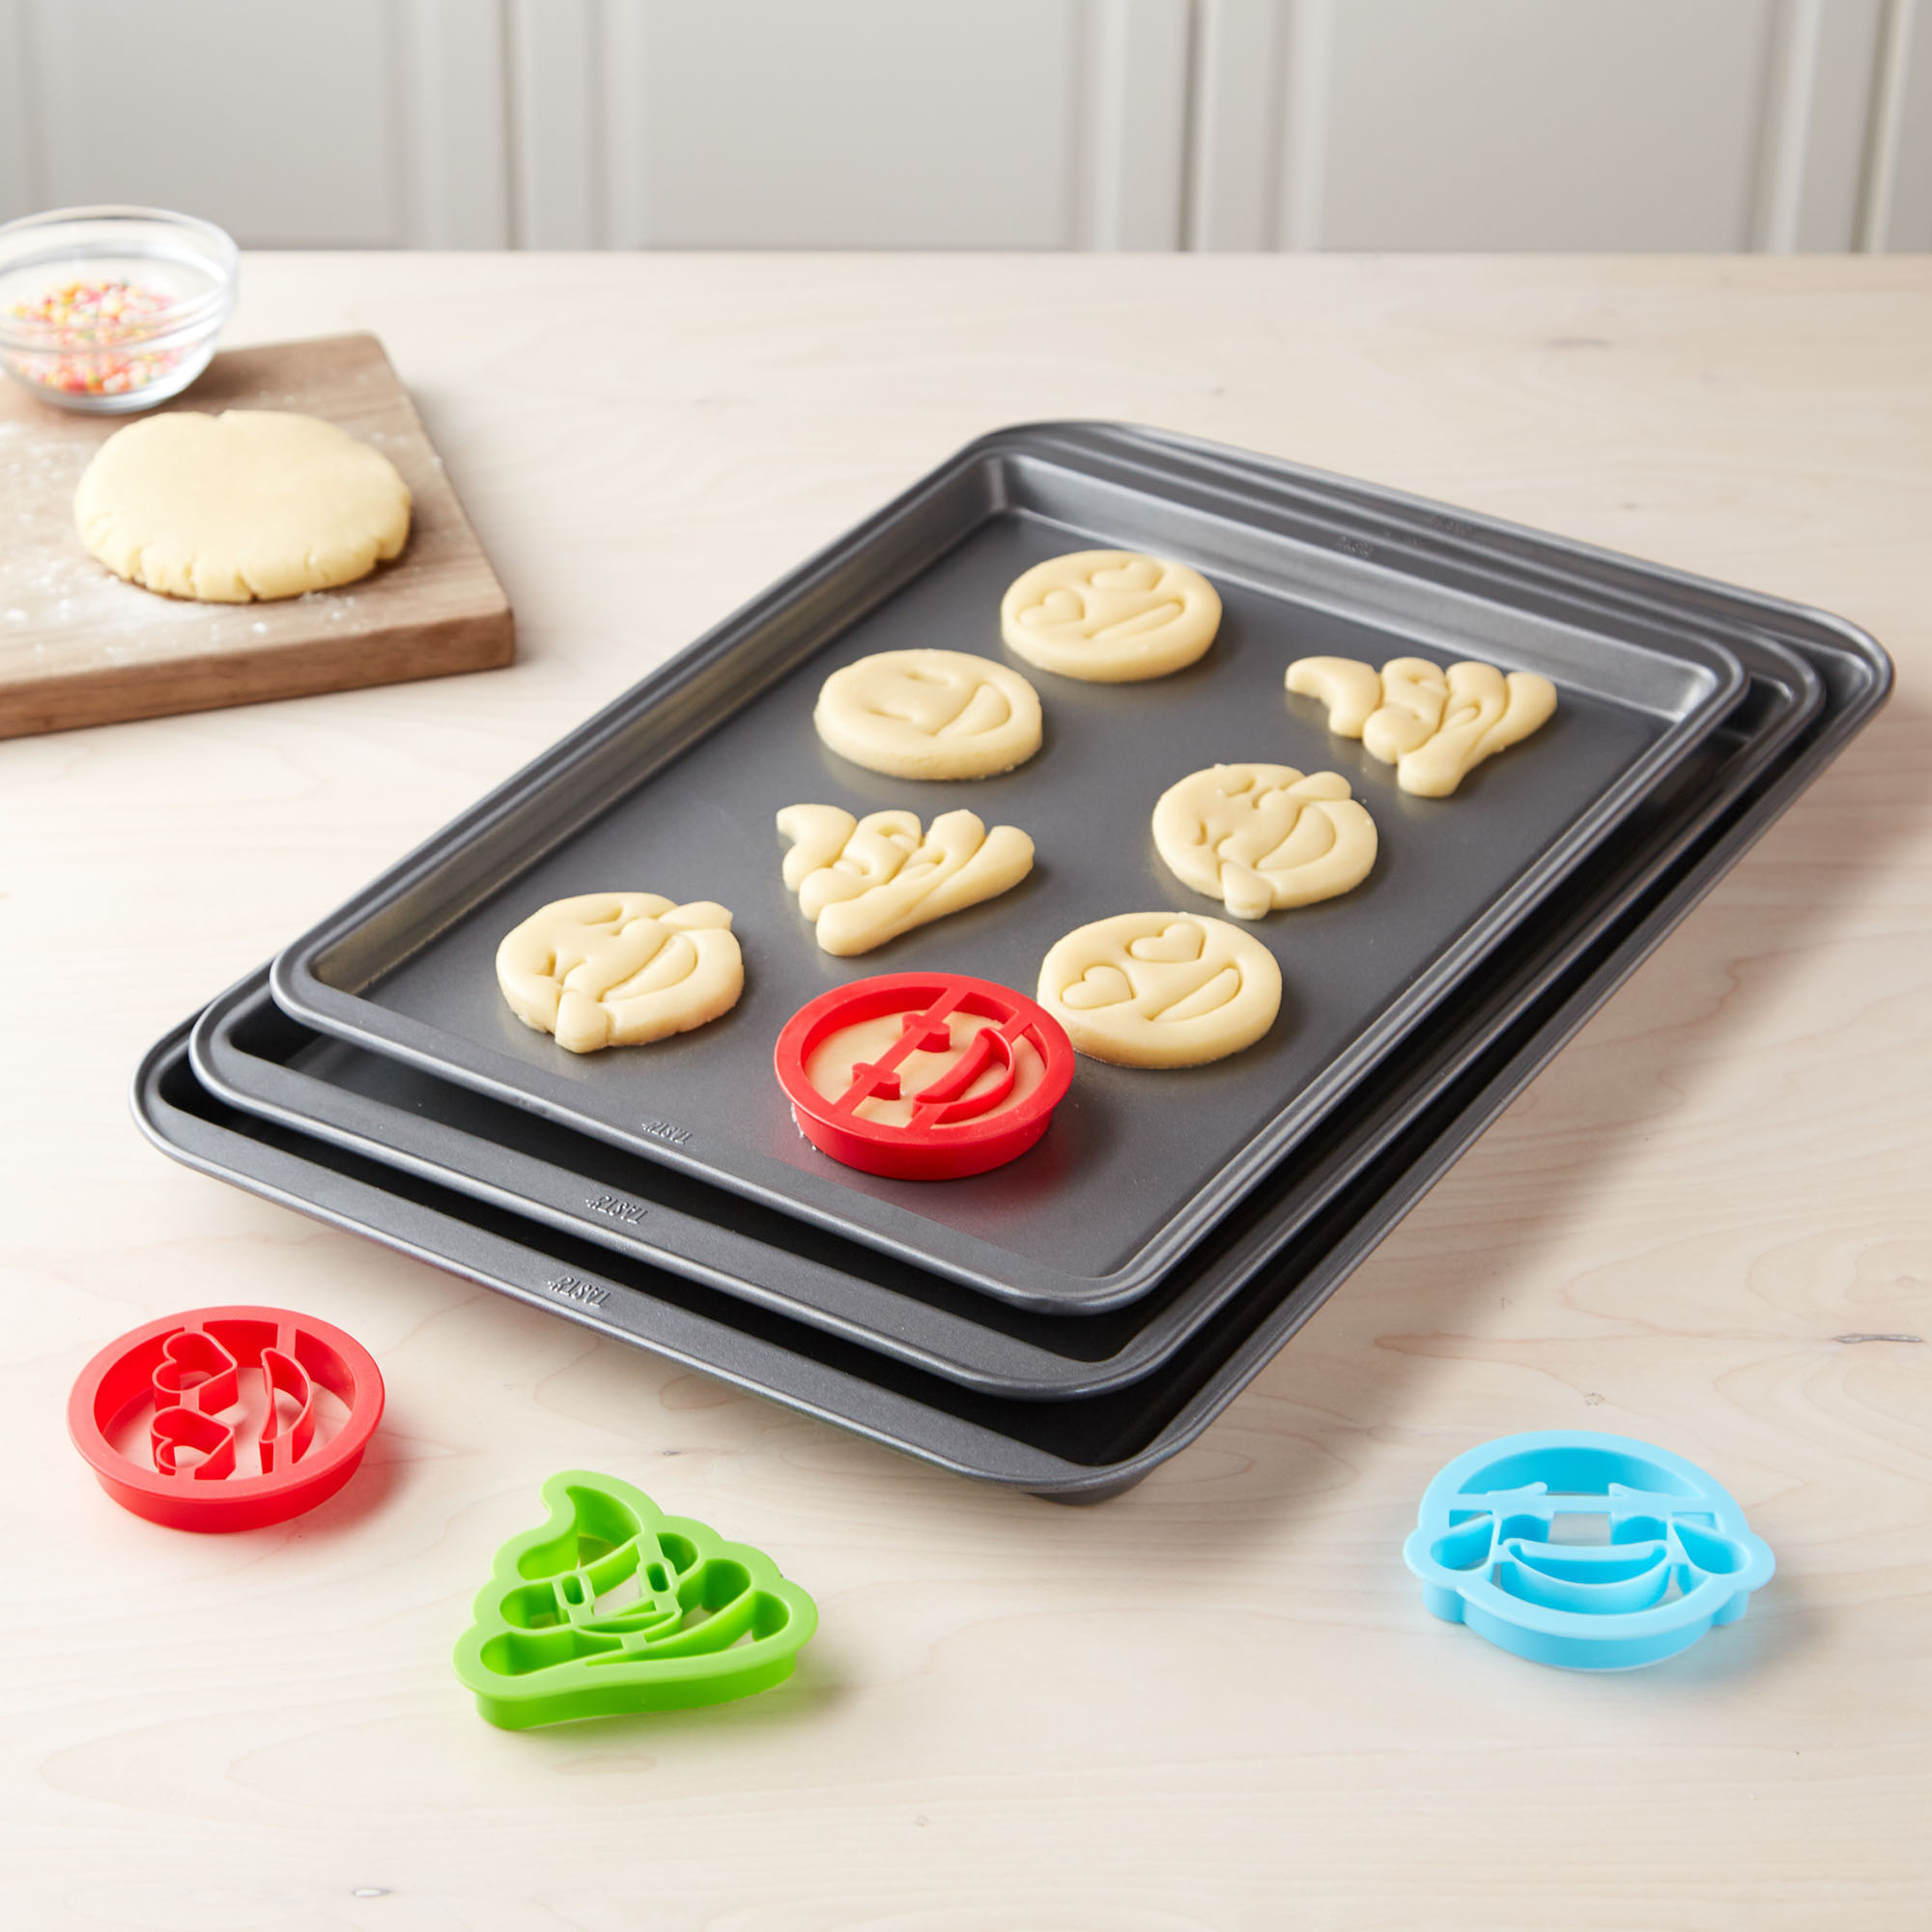 Tasty Cookie Sheet Set with 4 Cookie Cutters - image 1 of 11